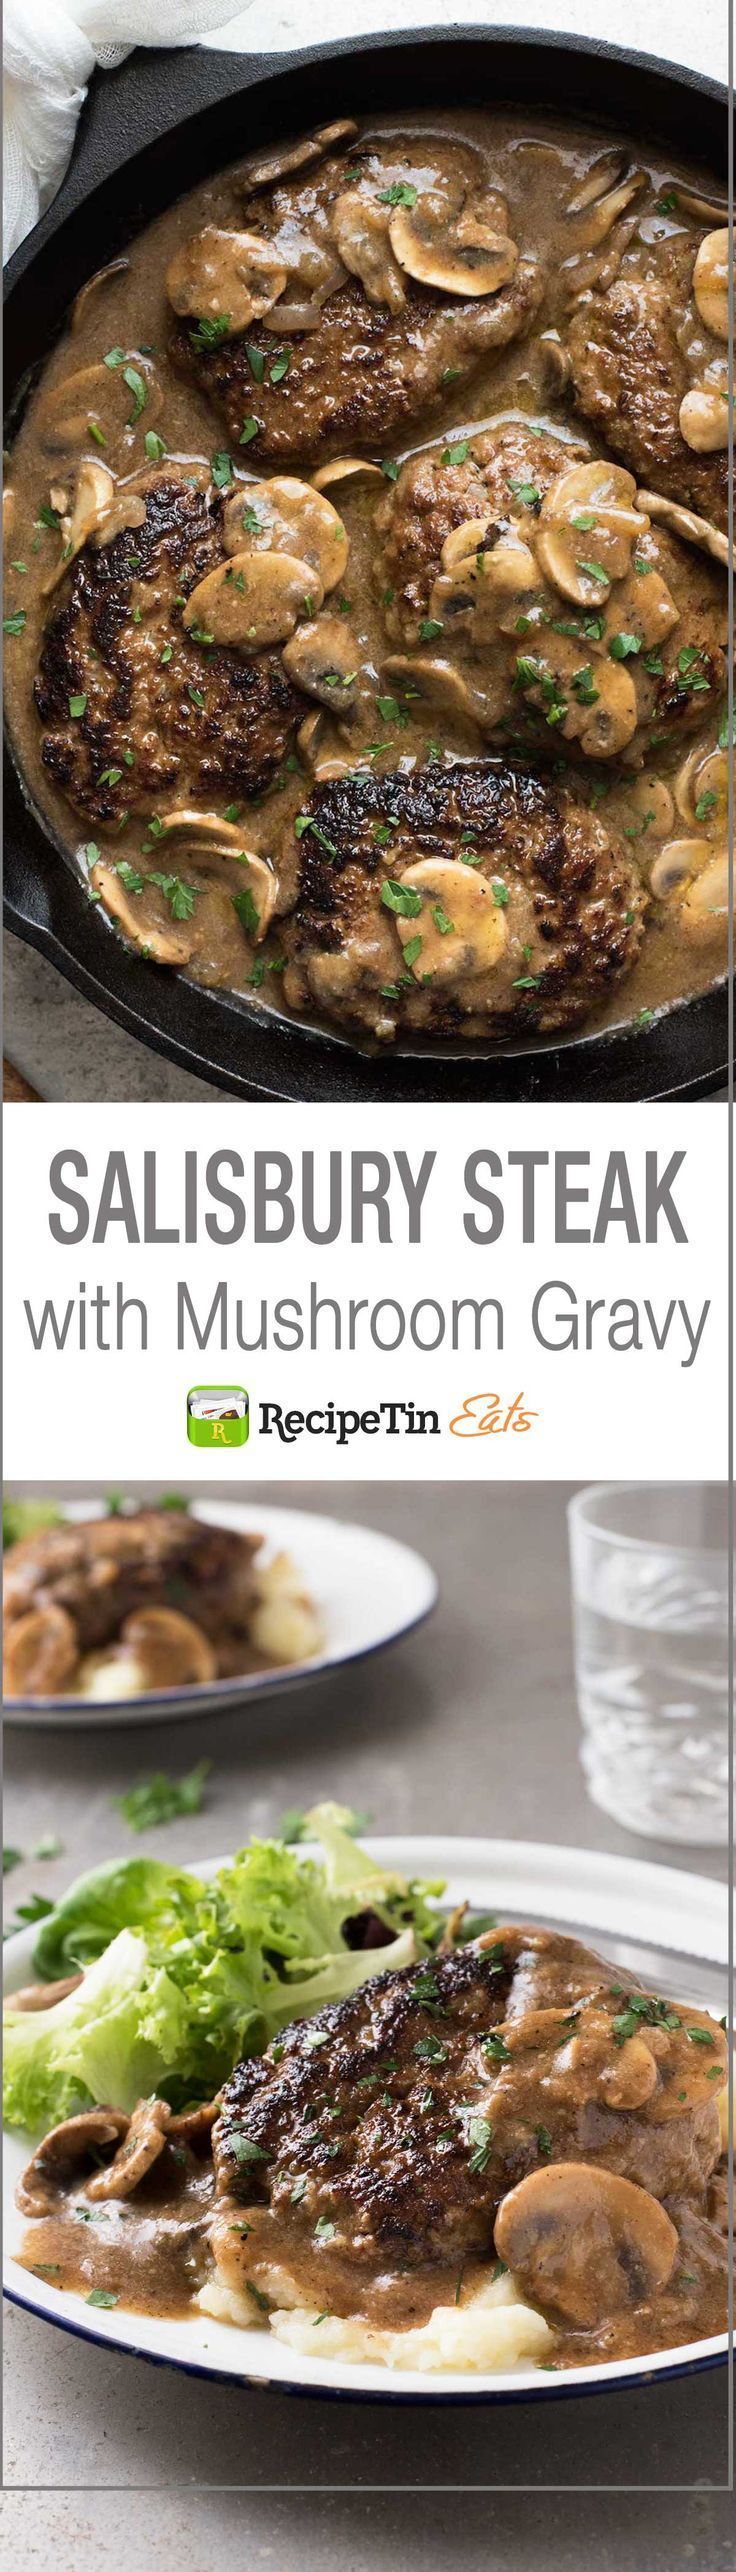 Salisbury Steak with Mushroom Gravy – Juicy steaks with my little tip for extra flavourful gravy!